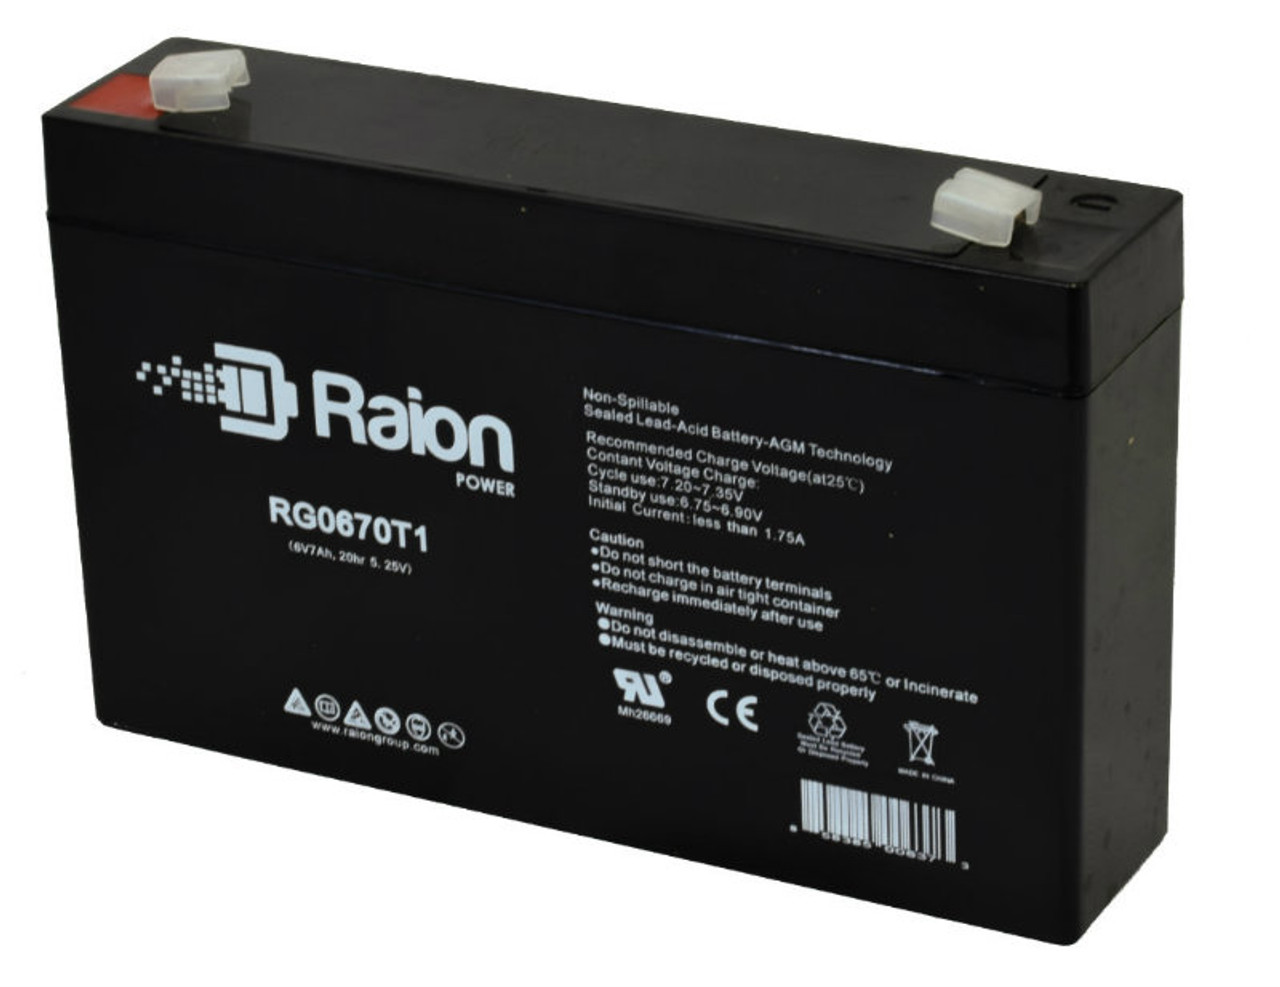 Raion Power RG0670T1 6V 7Ah Replacement Battery Cartridge for Ivy Biomedical System 701 ECG MONITOR Medical Equipment